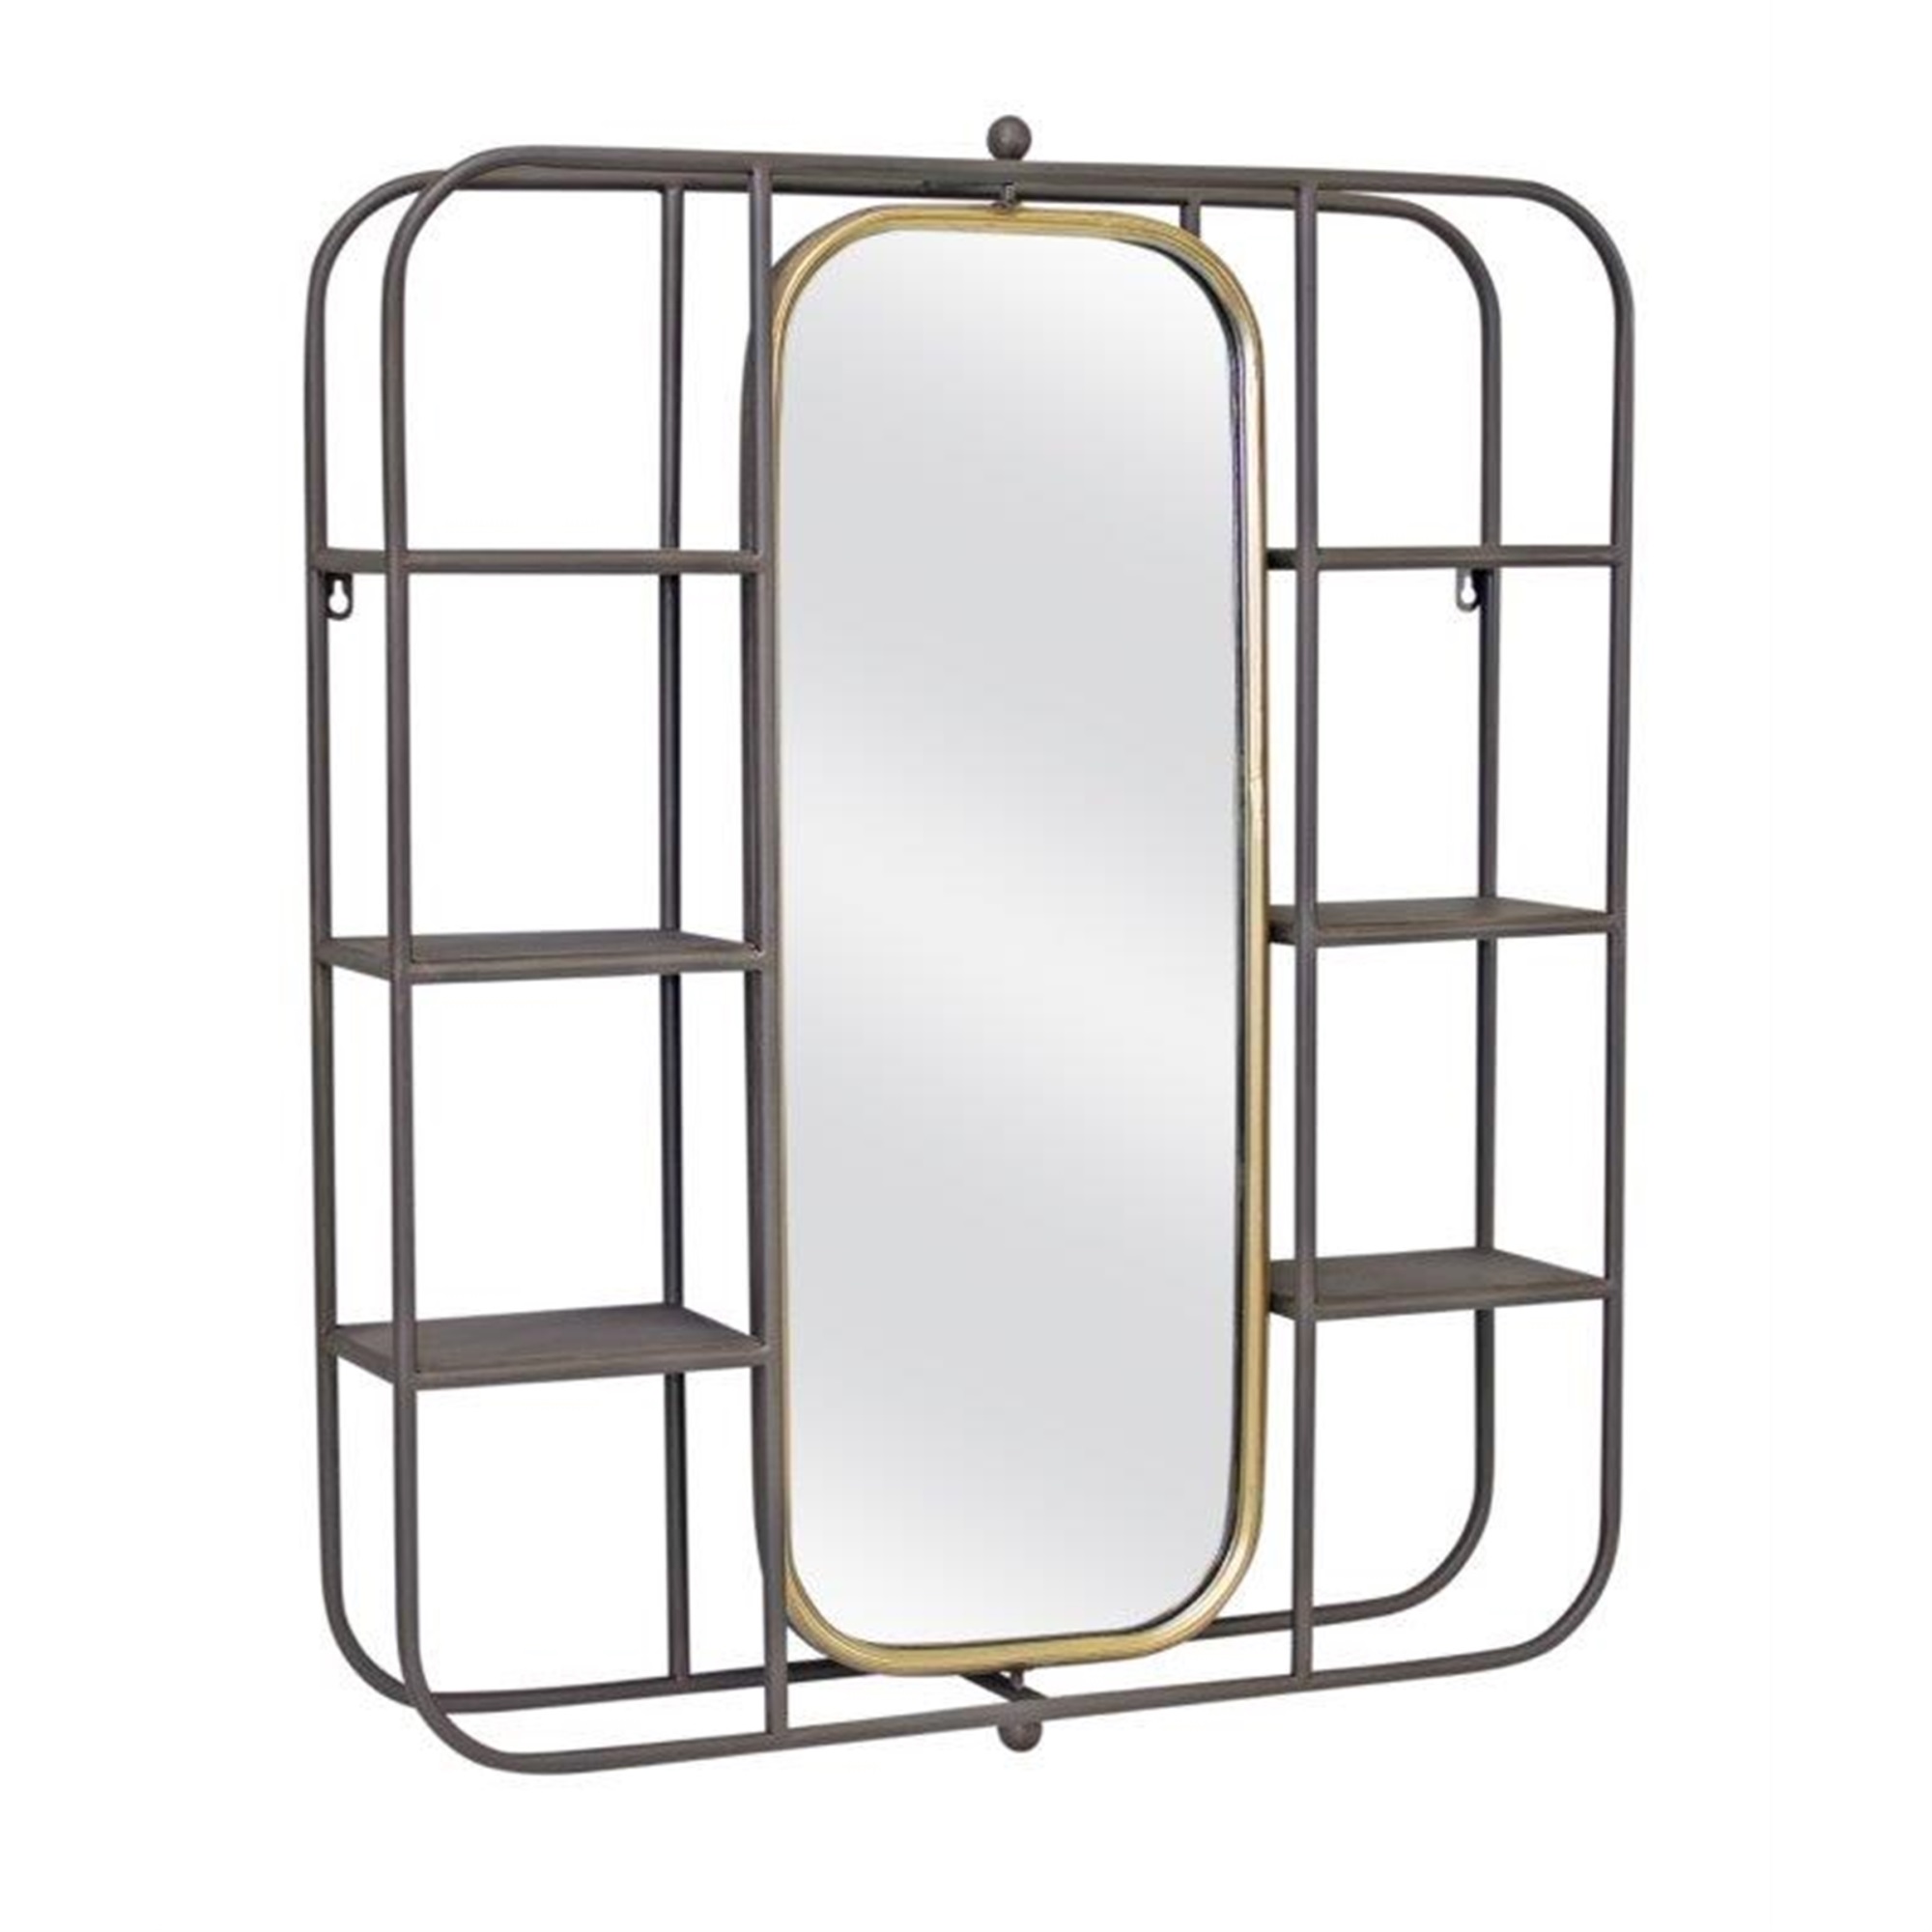 Wall Mirror with Shelves 27.5"L x 33.5"H Iron/Glass